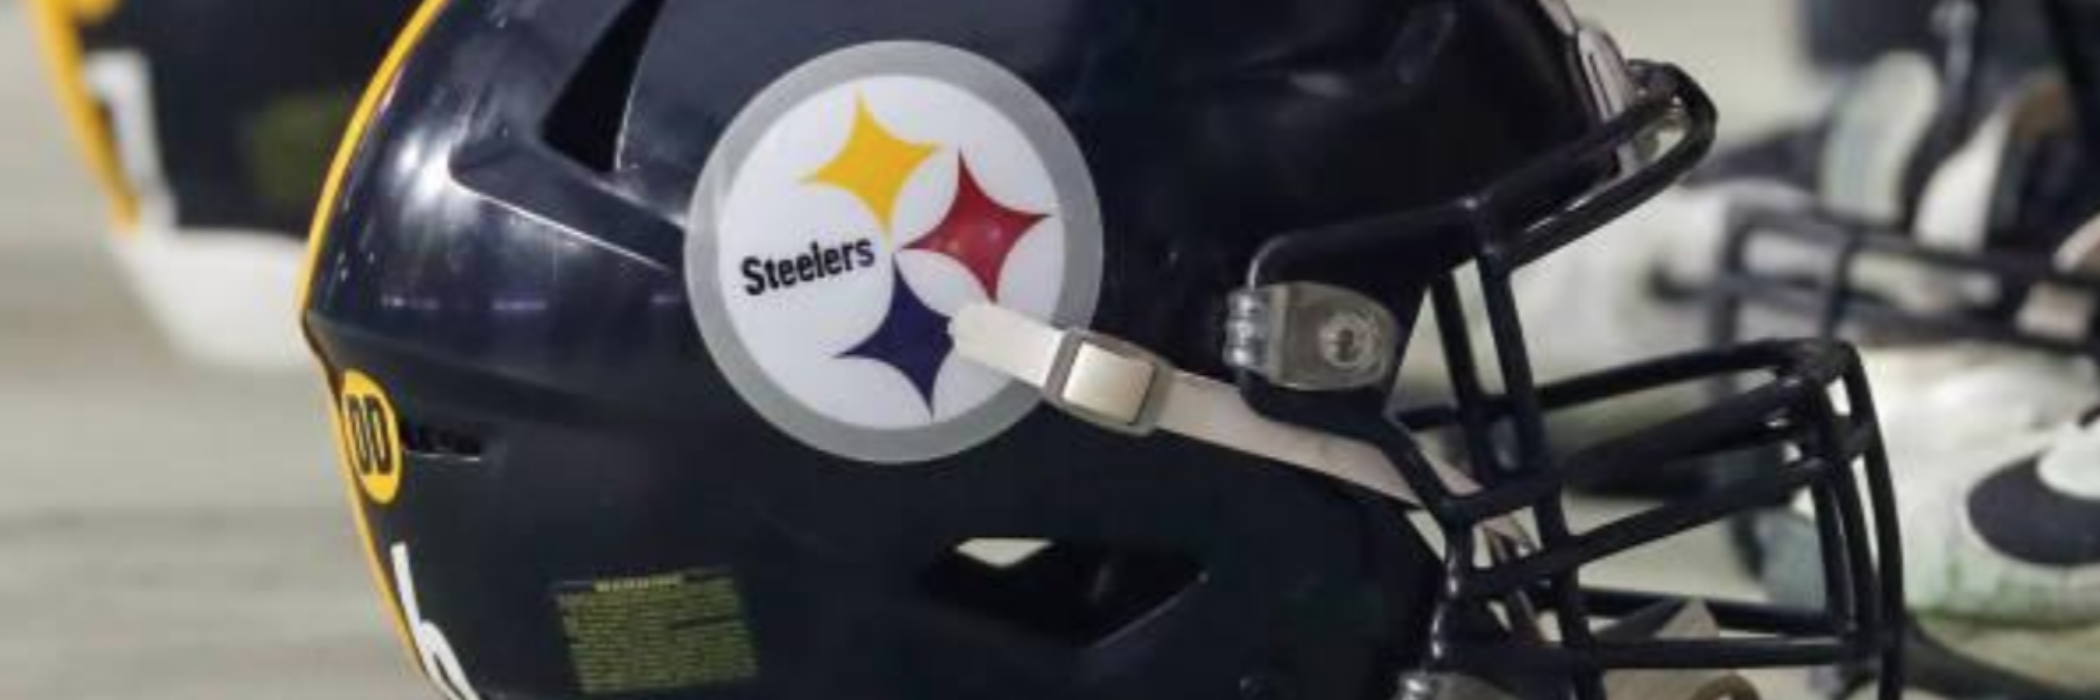 History Of The Steelers Logo and The Team